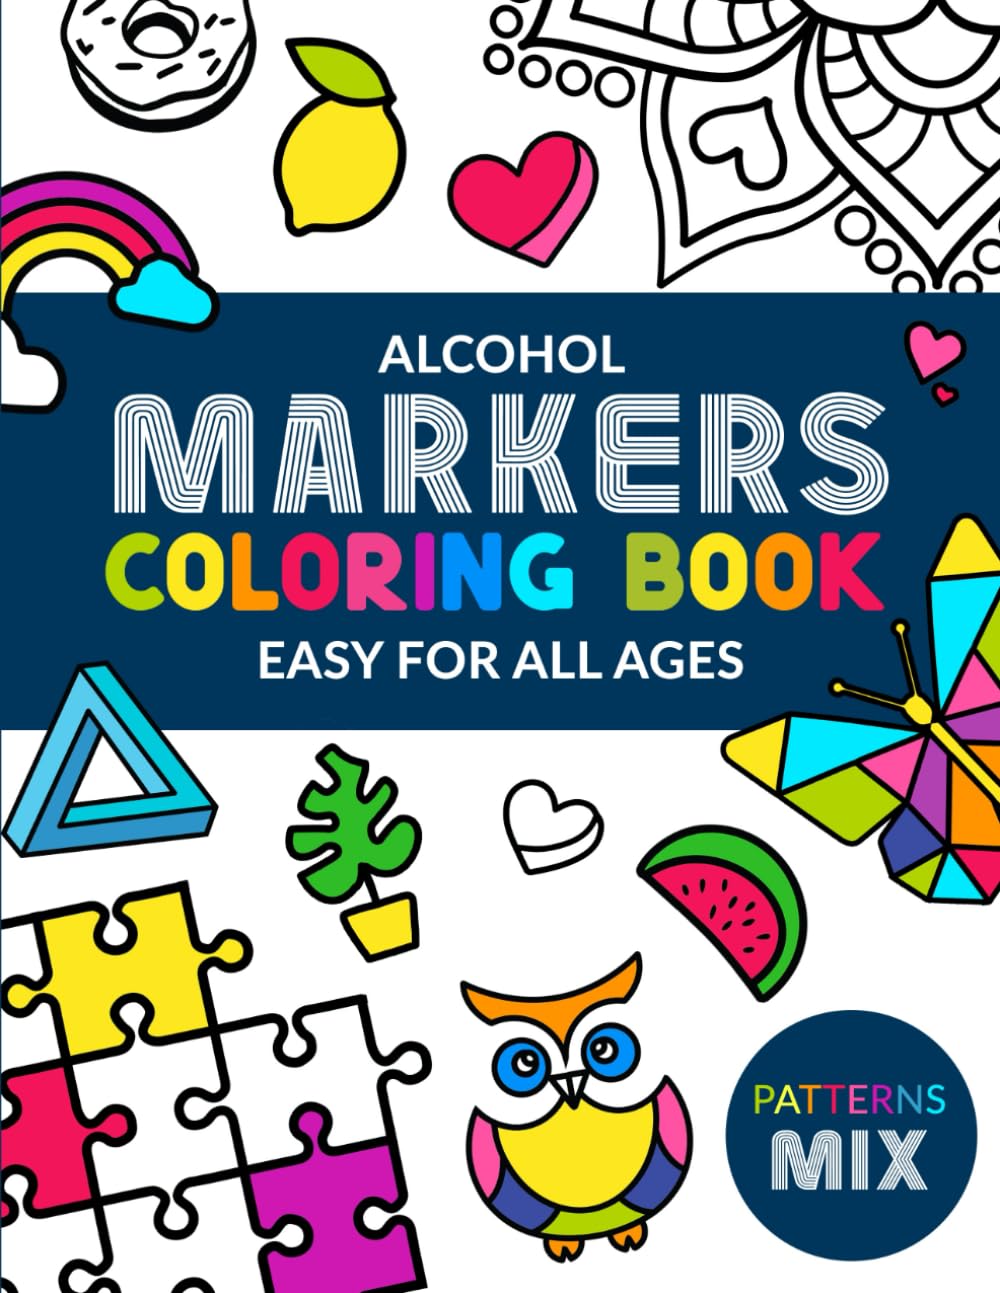 Alcohol Marker Coloring Book: 50 Simple Bold And Easy Satisfying Patterns Mindful Mix. Minimalist Small Cute Things. For Relaxation Anxiety And